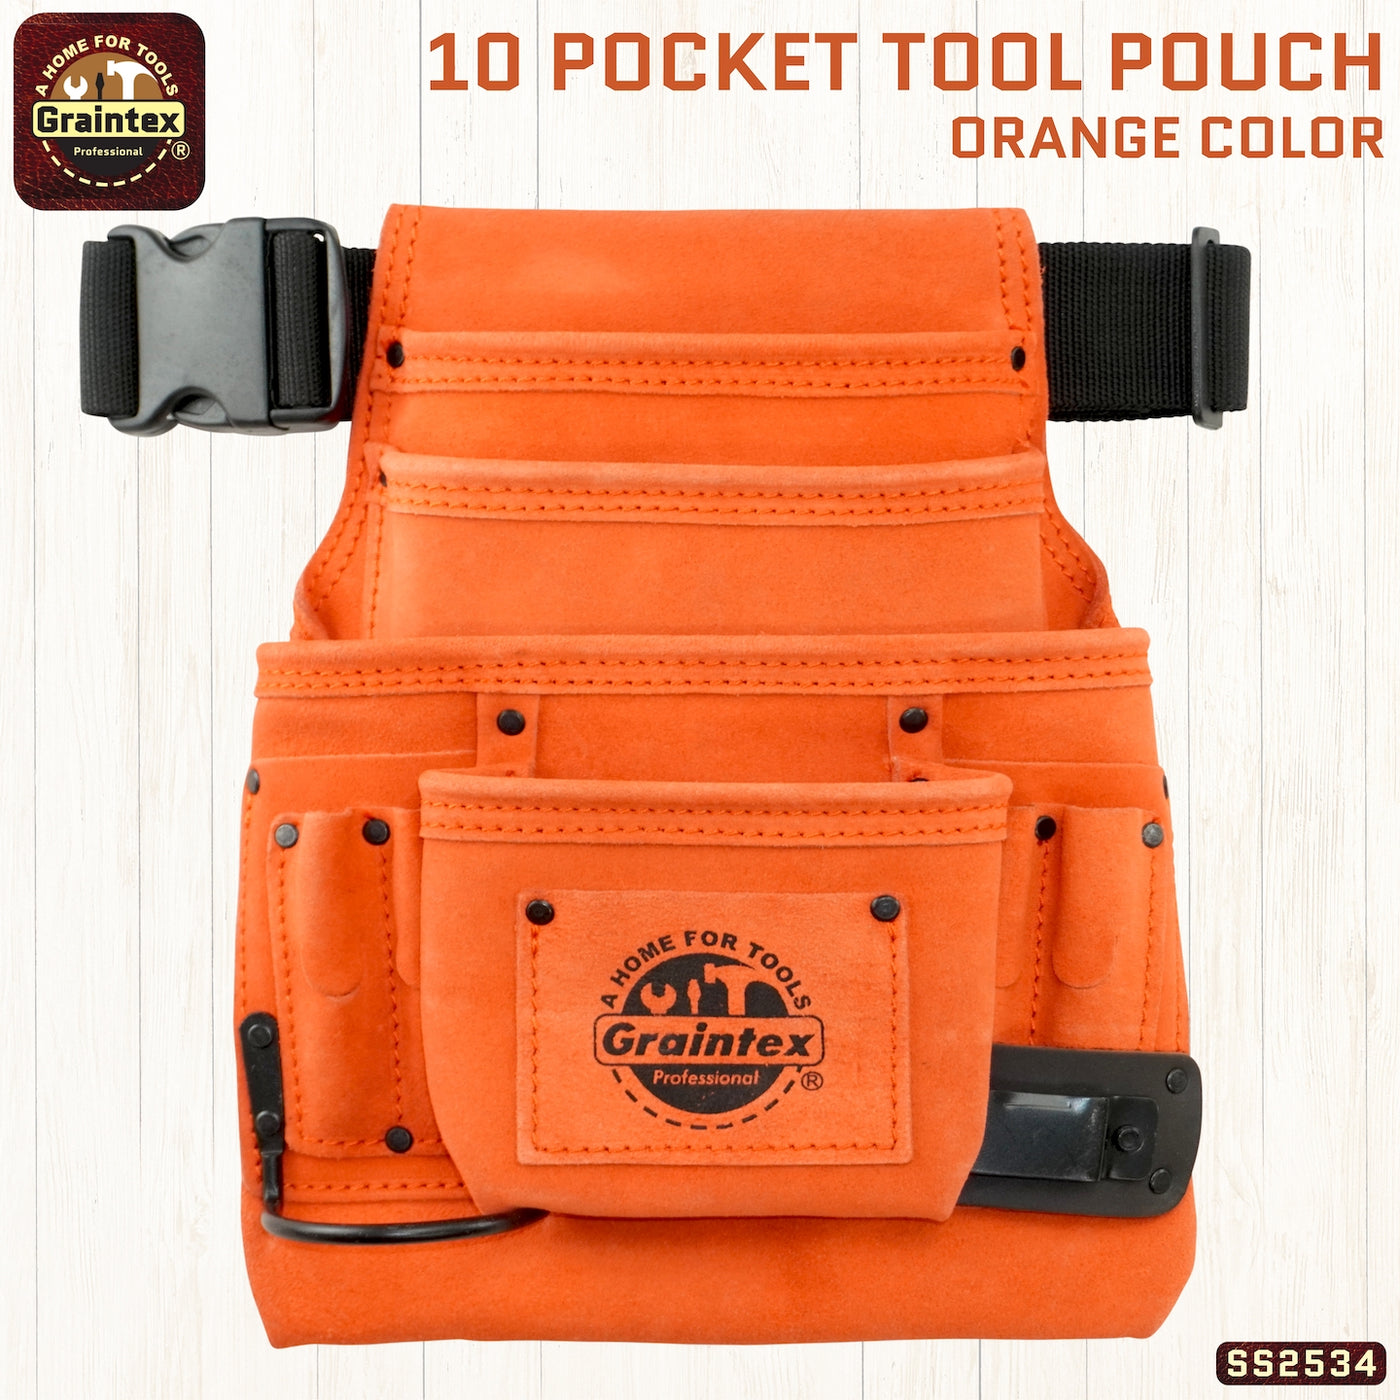 SS2534 :: 10 Pocket Nail & Tool Pouch Orange Color Suede Leather with Belt